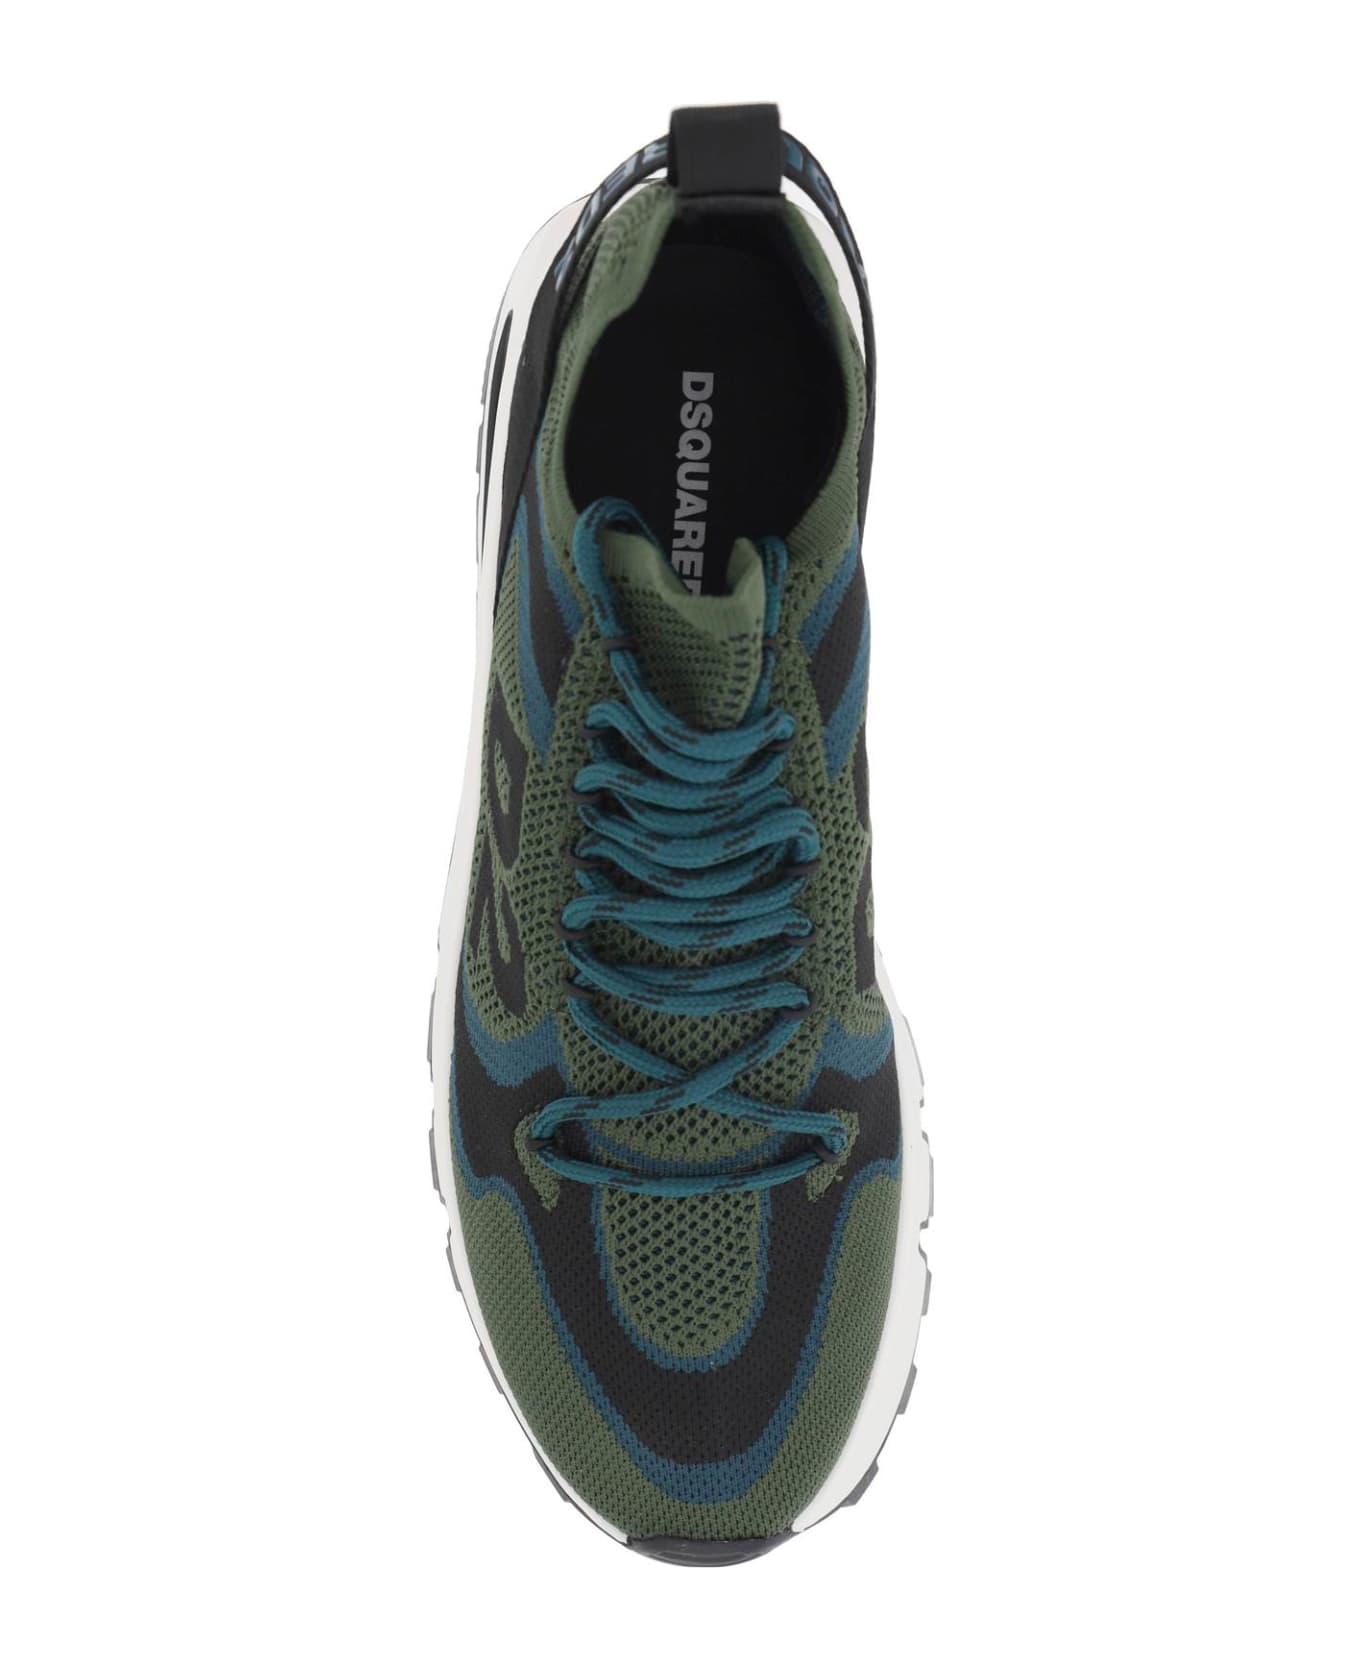 Dsquared2 Run Ds2 Sneakers - MILITARY TEAL BLACK (Black) スニーカー